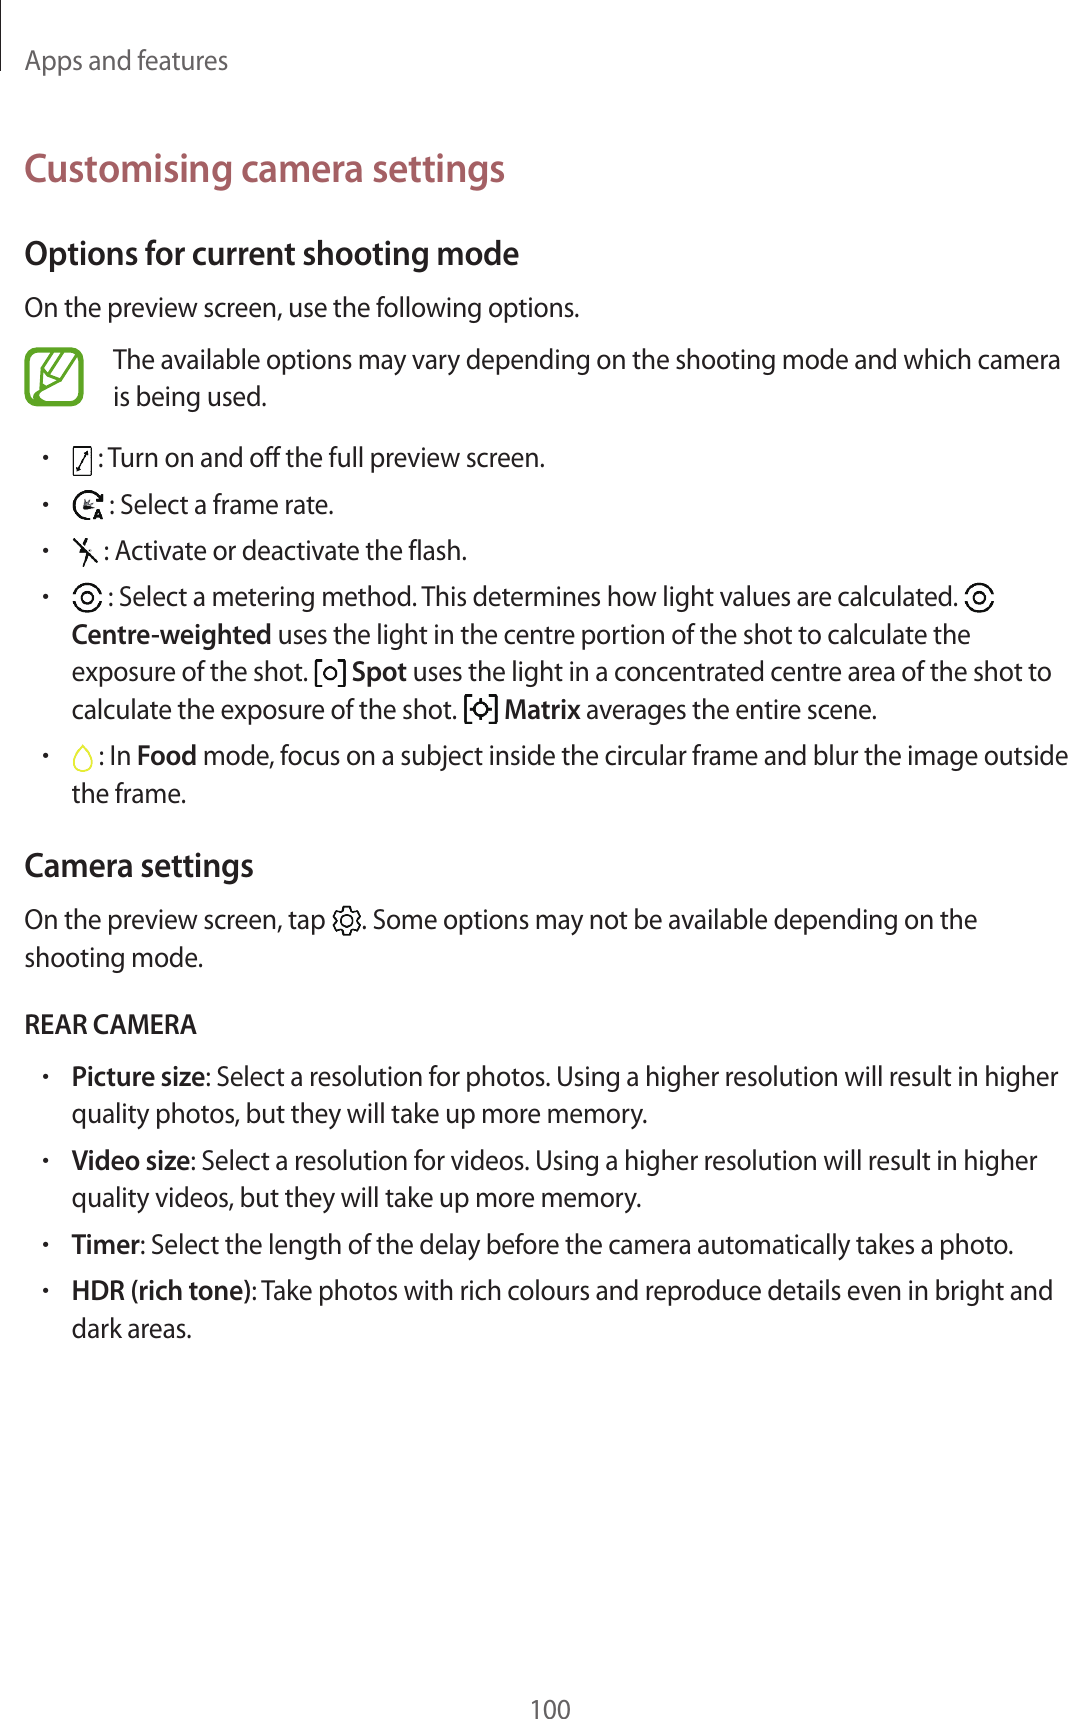 Apps and features100Customising camera settingsOptions for current shooting modeOn the preview screen, use the following options.The available options may vary depending on the shooting mode and which camera is being used.• : Turn on and off the full preview screen.• : Select a frame rate.• : Activate or deactivate the flash.• : Select a metering method. This determines how light values are calculated.   Centre-weighted uses the light in the centre portion of the shot to calculate the exposure of the shot.   Spot uses the light in a concentrated centre area of the shot to calculate the exposure of the shot.   Matrix averages the entire scene.• : In Food mode, focus on a subject inside the circular frame and blur the image outside the frame.Camera settingsOn the preview screen, tap  . Some options may not be available depending on the shooting mode.REAR CAMERA•Picture size: Select a resolution for photos. Using a higher resolution will result in higher quality photos, but they will take up more memory.•Video size: Select a resolution for videos. Using a higher resolution will result in higher quality videos, but they will take up more memory.•Timer: Select the length of the delay before the camera automatically takes a photo.•HDR (rich tone): Take photos with rich colours and reproduce details even in bright and dark areas.